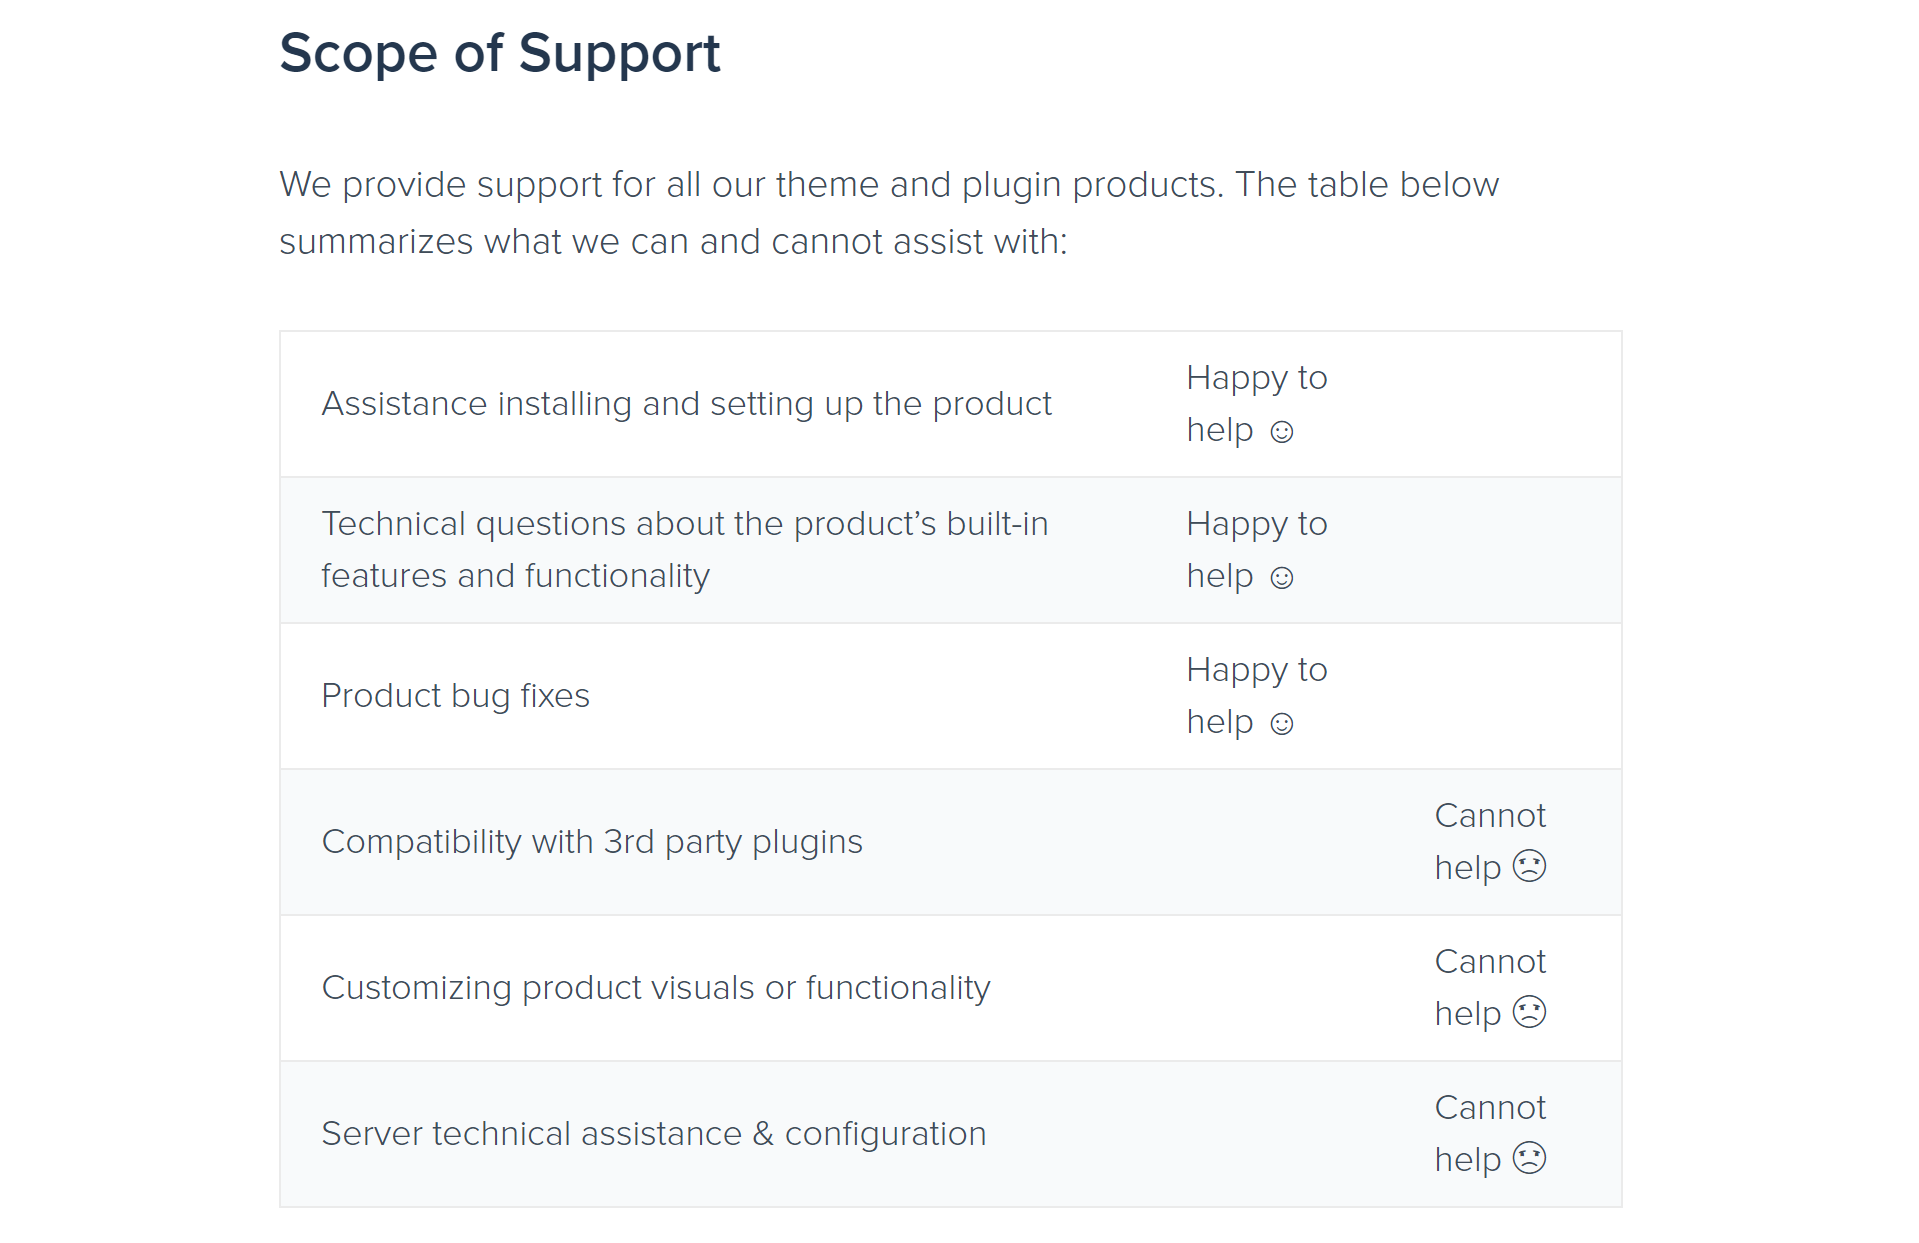 More detailed support policy